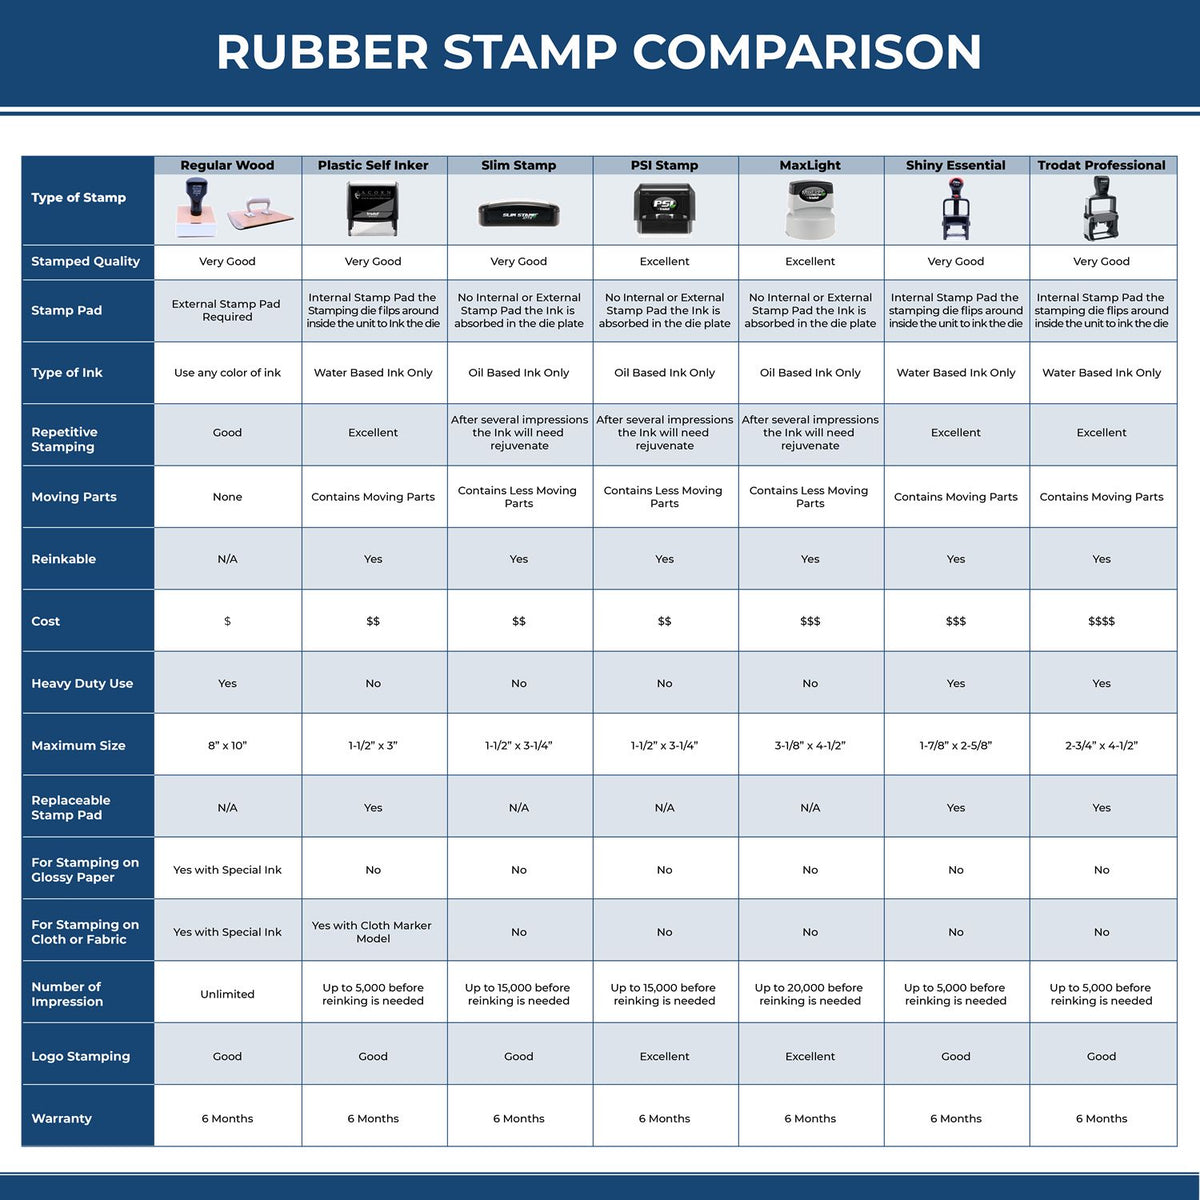 Large Validate Only Rubber Stamp 4591R Rubber Stamp Comparison